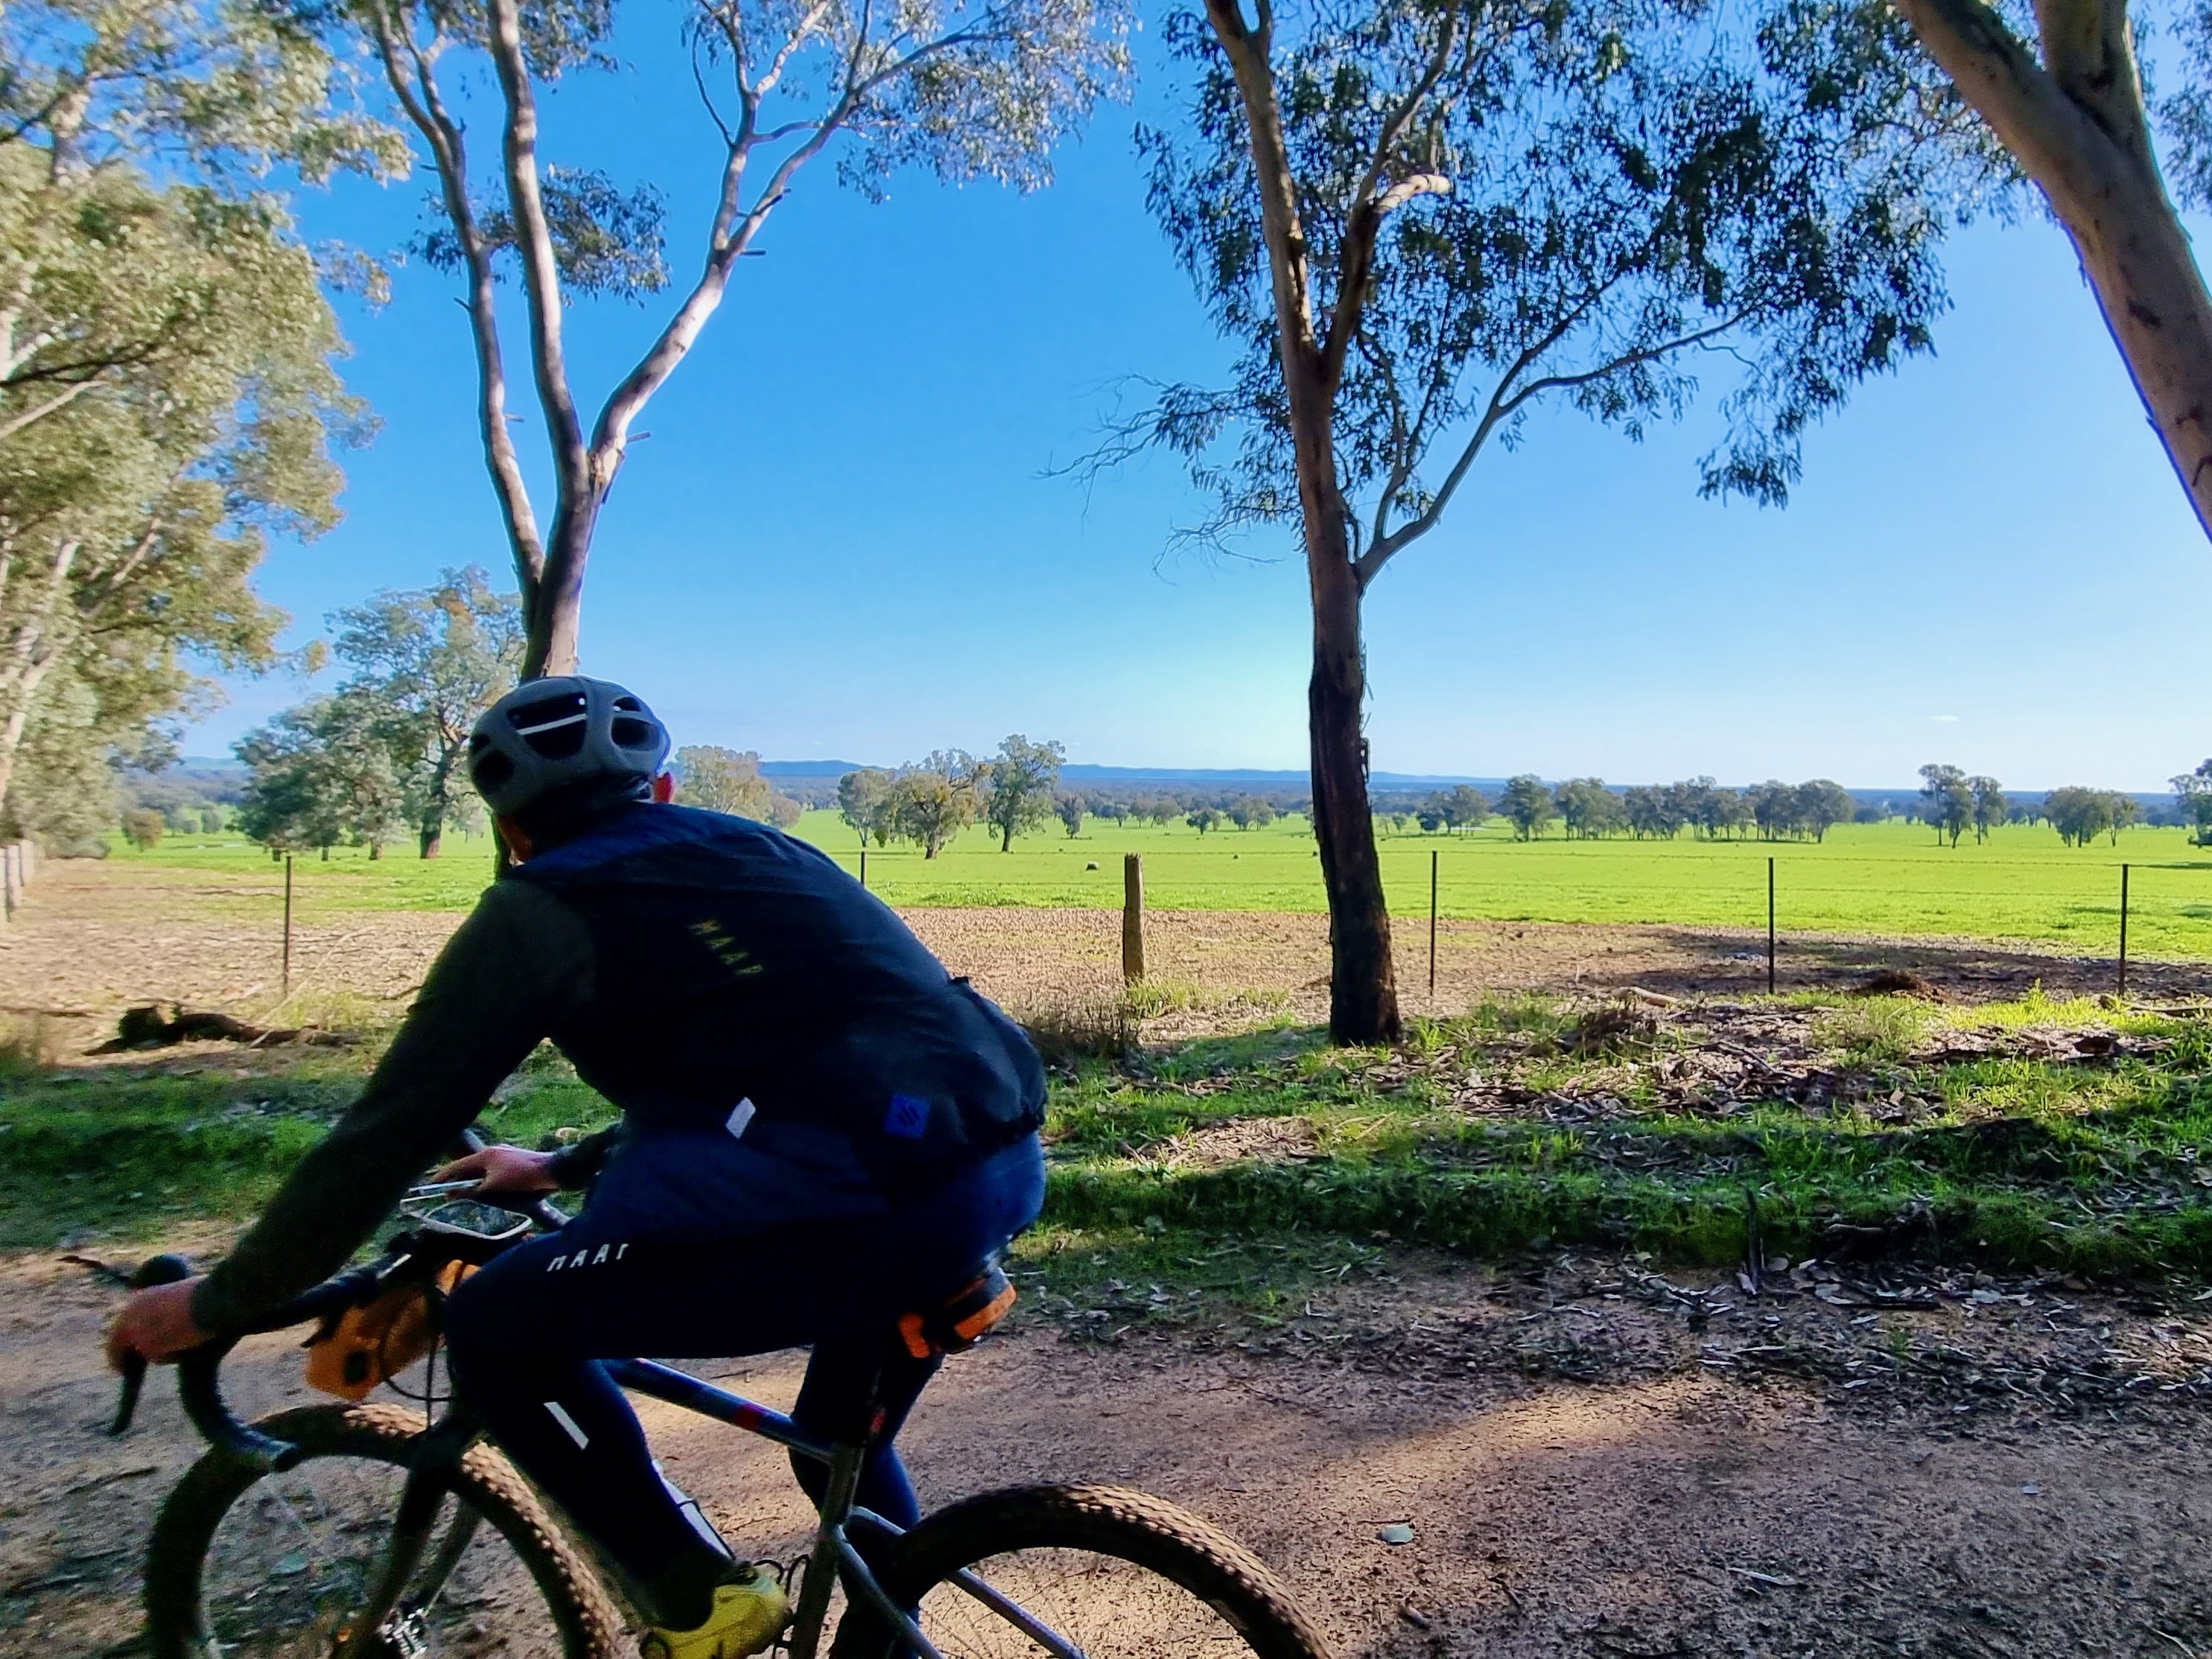 Cyclist riding through native bushland admiring the the scenery  of open farmland and mountains in the distance on a sunny day